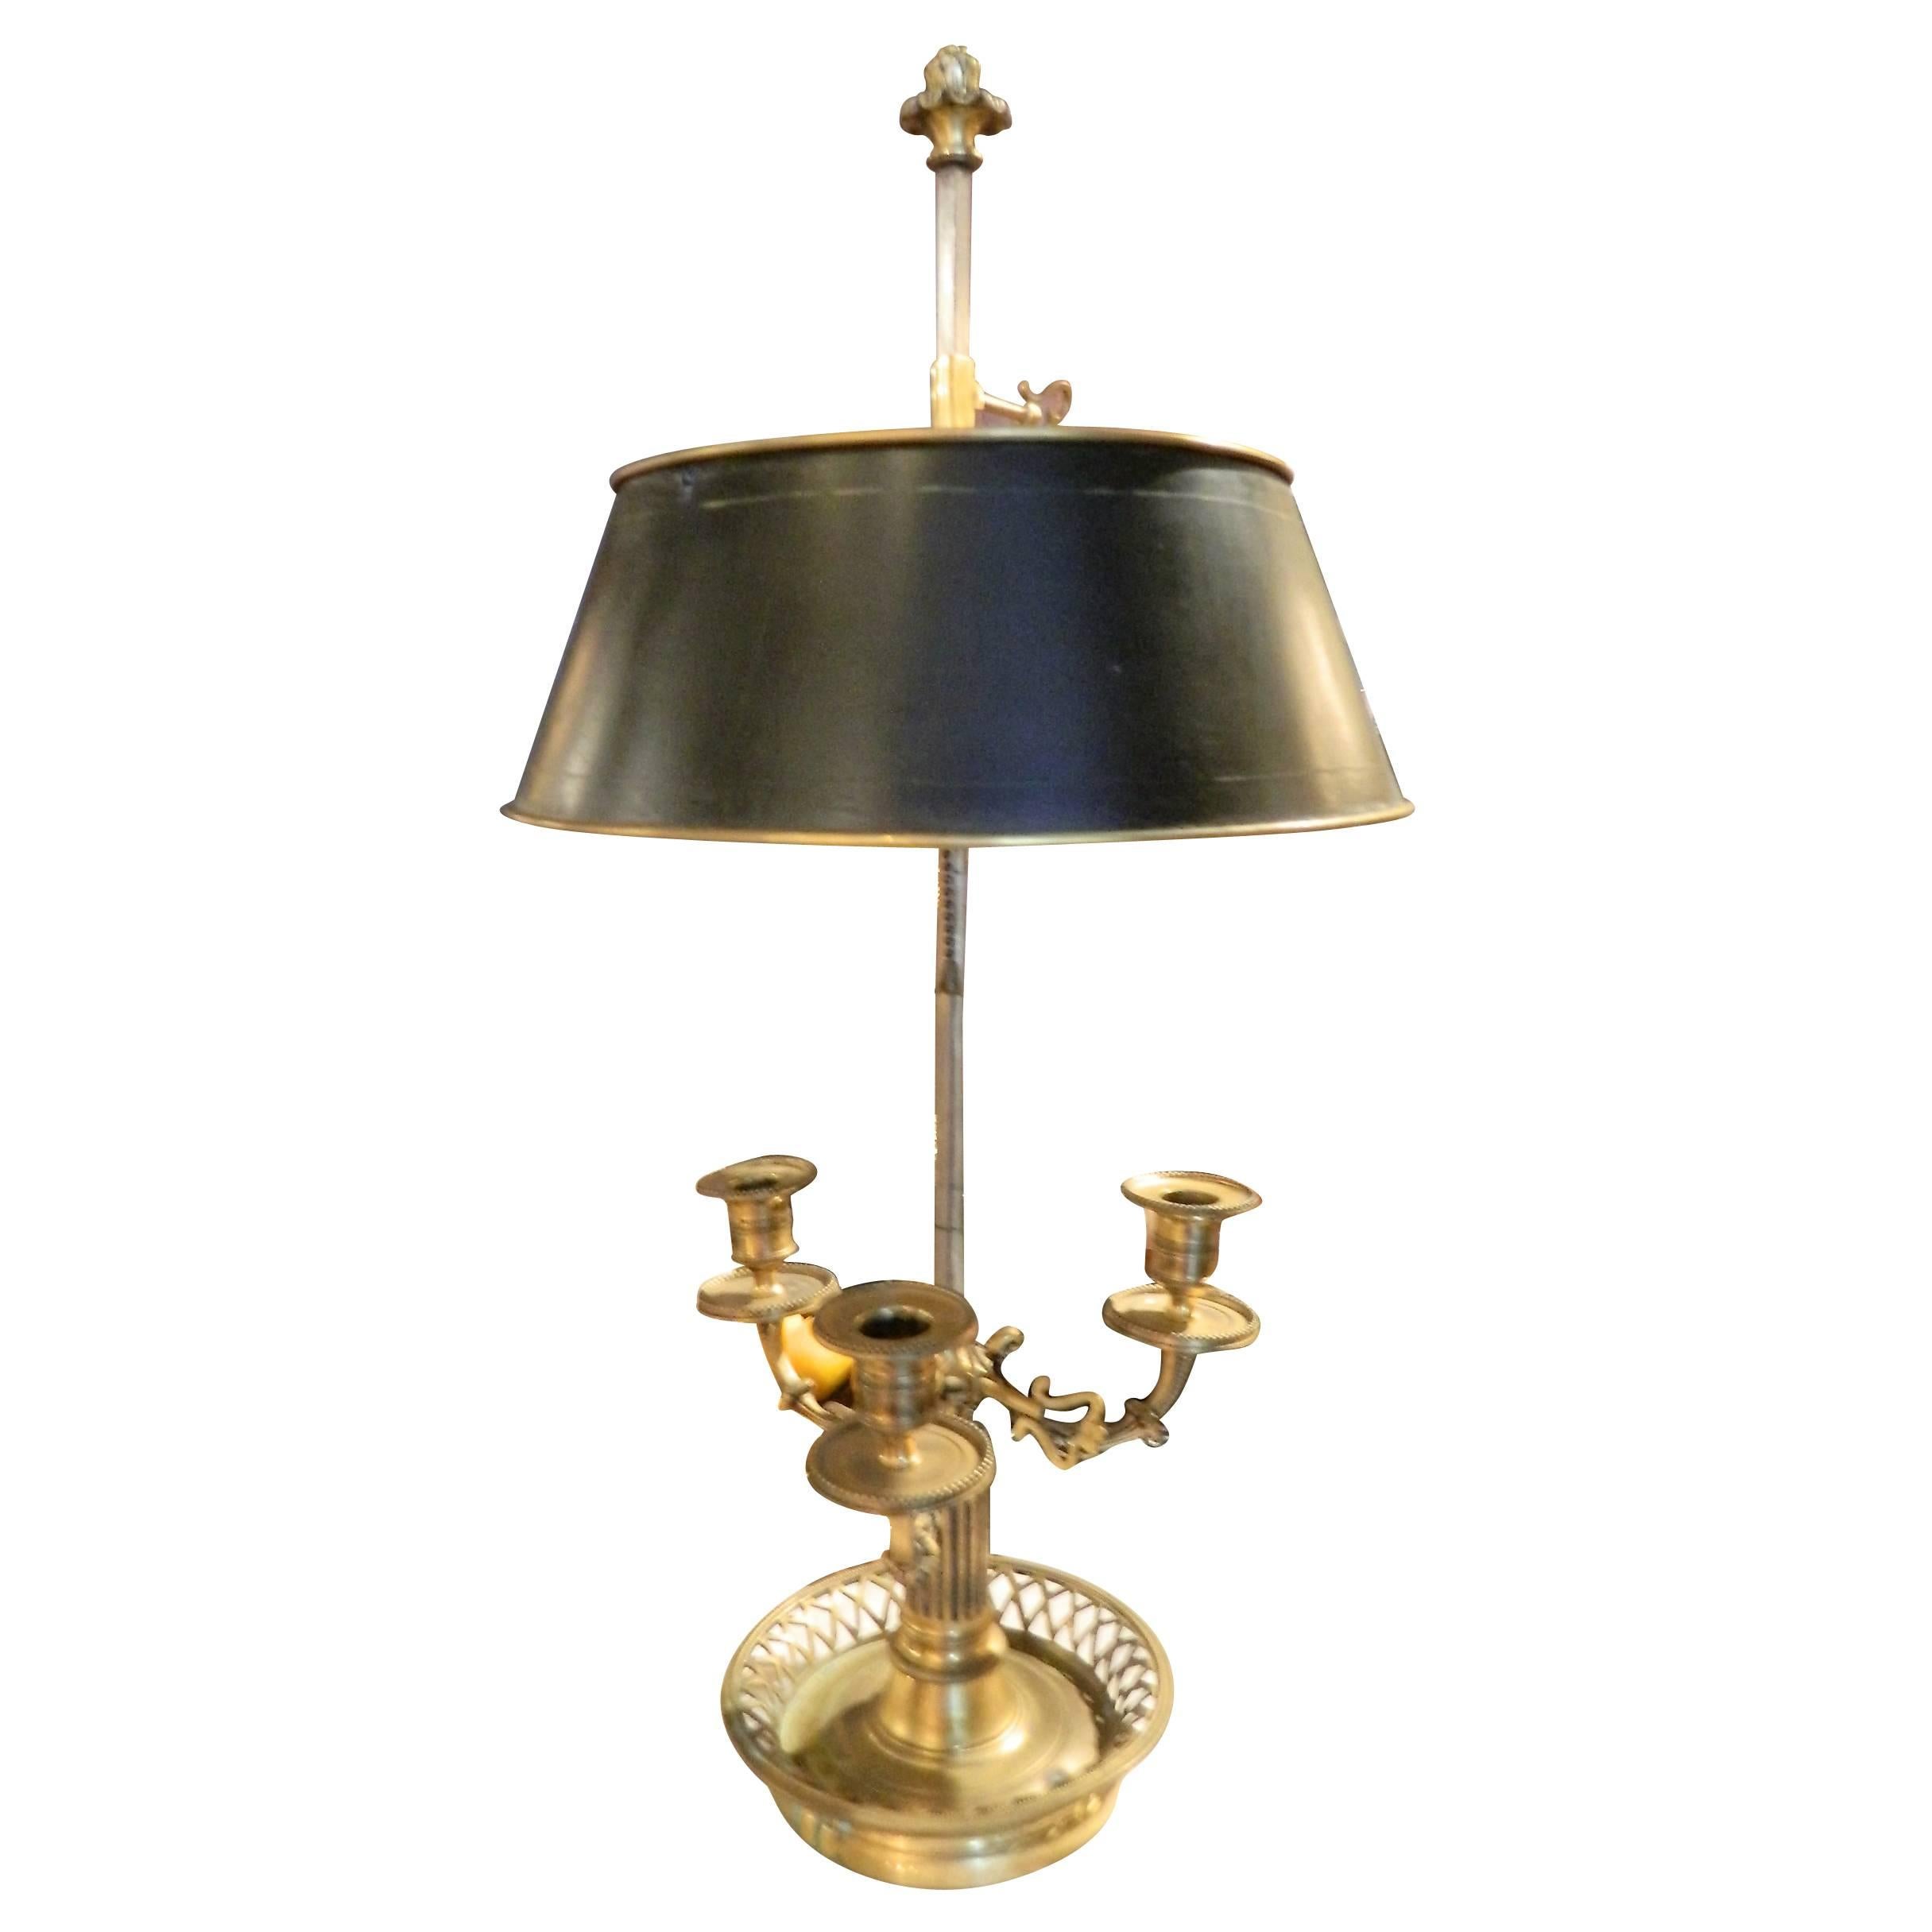 Brass Bouillotte Lamp with a Reticulated Base, Late 19th-Early 20th Century  